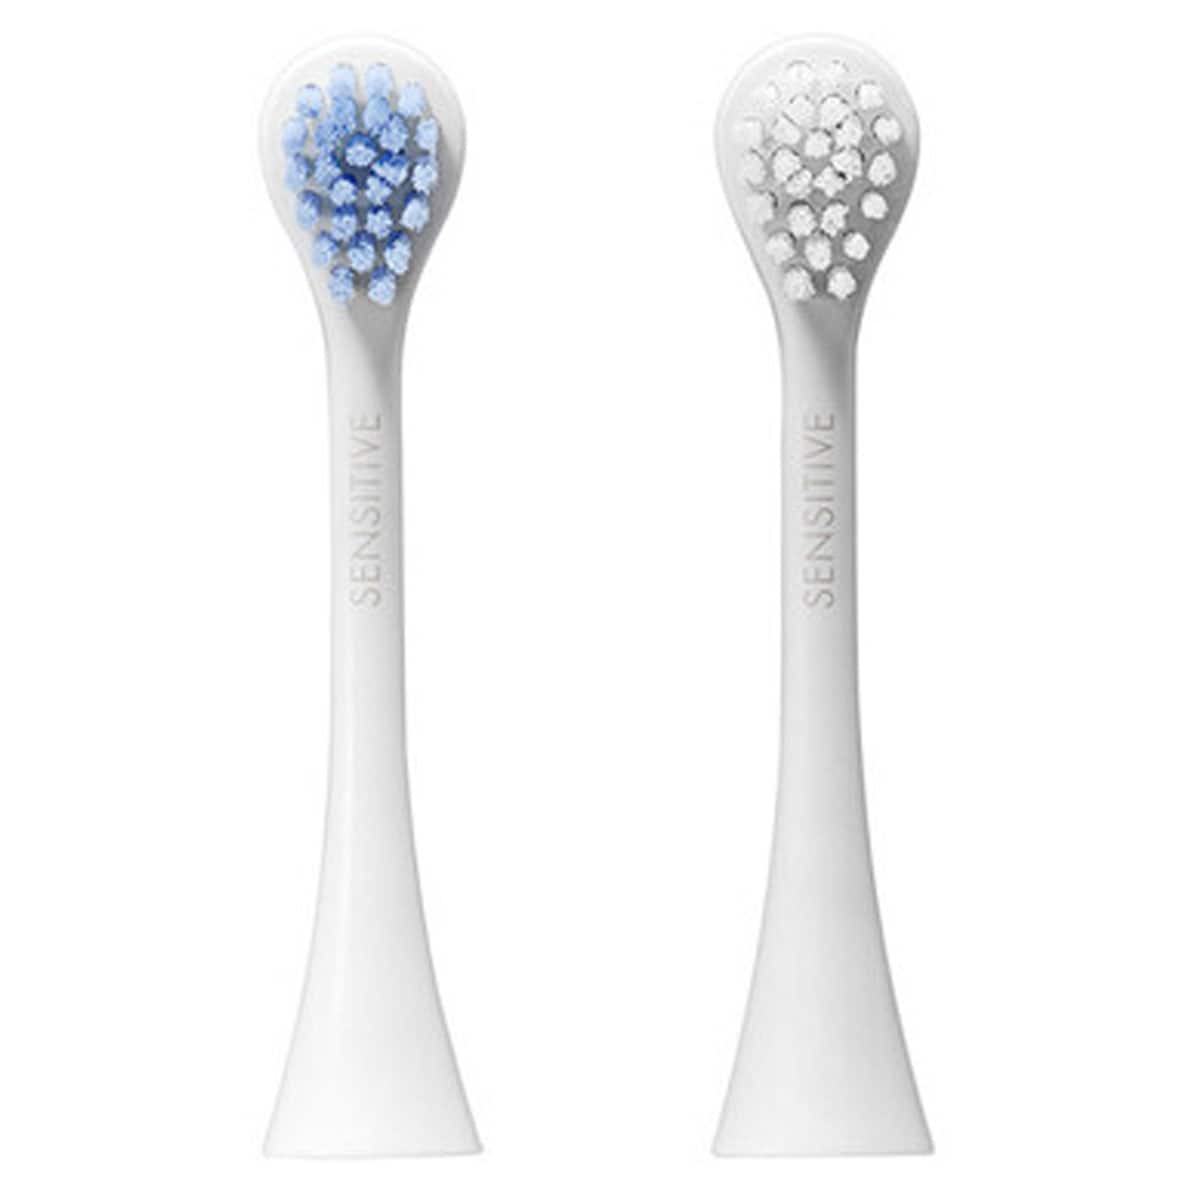 Curaprox Hydrosonic Replacement Sensitive Duo Toothbrush Heads 2 Pack